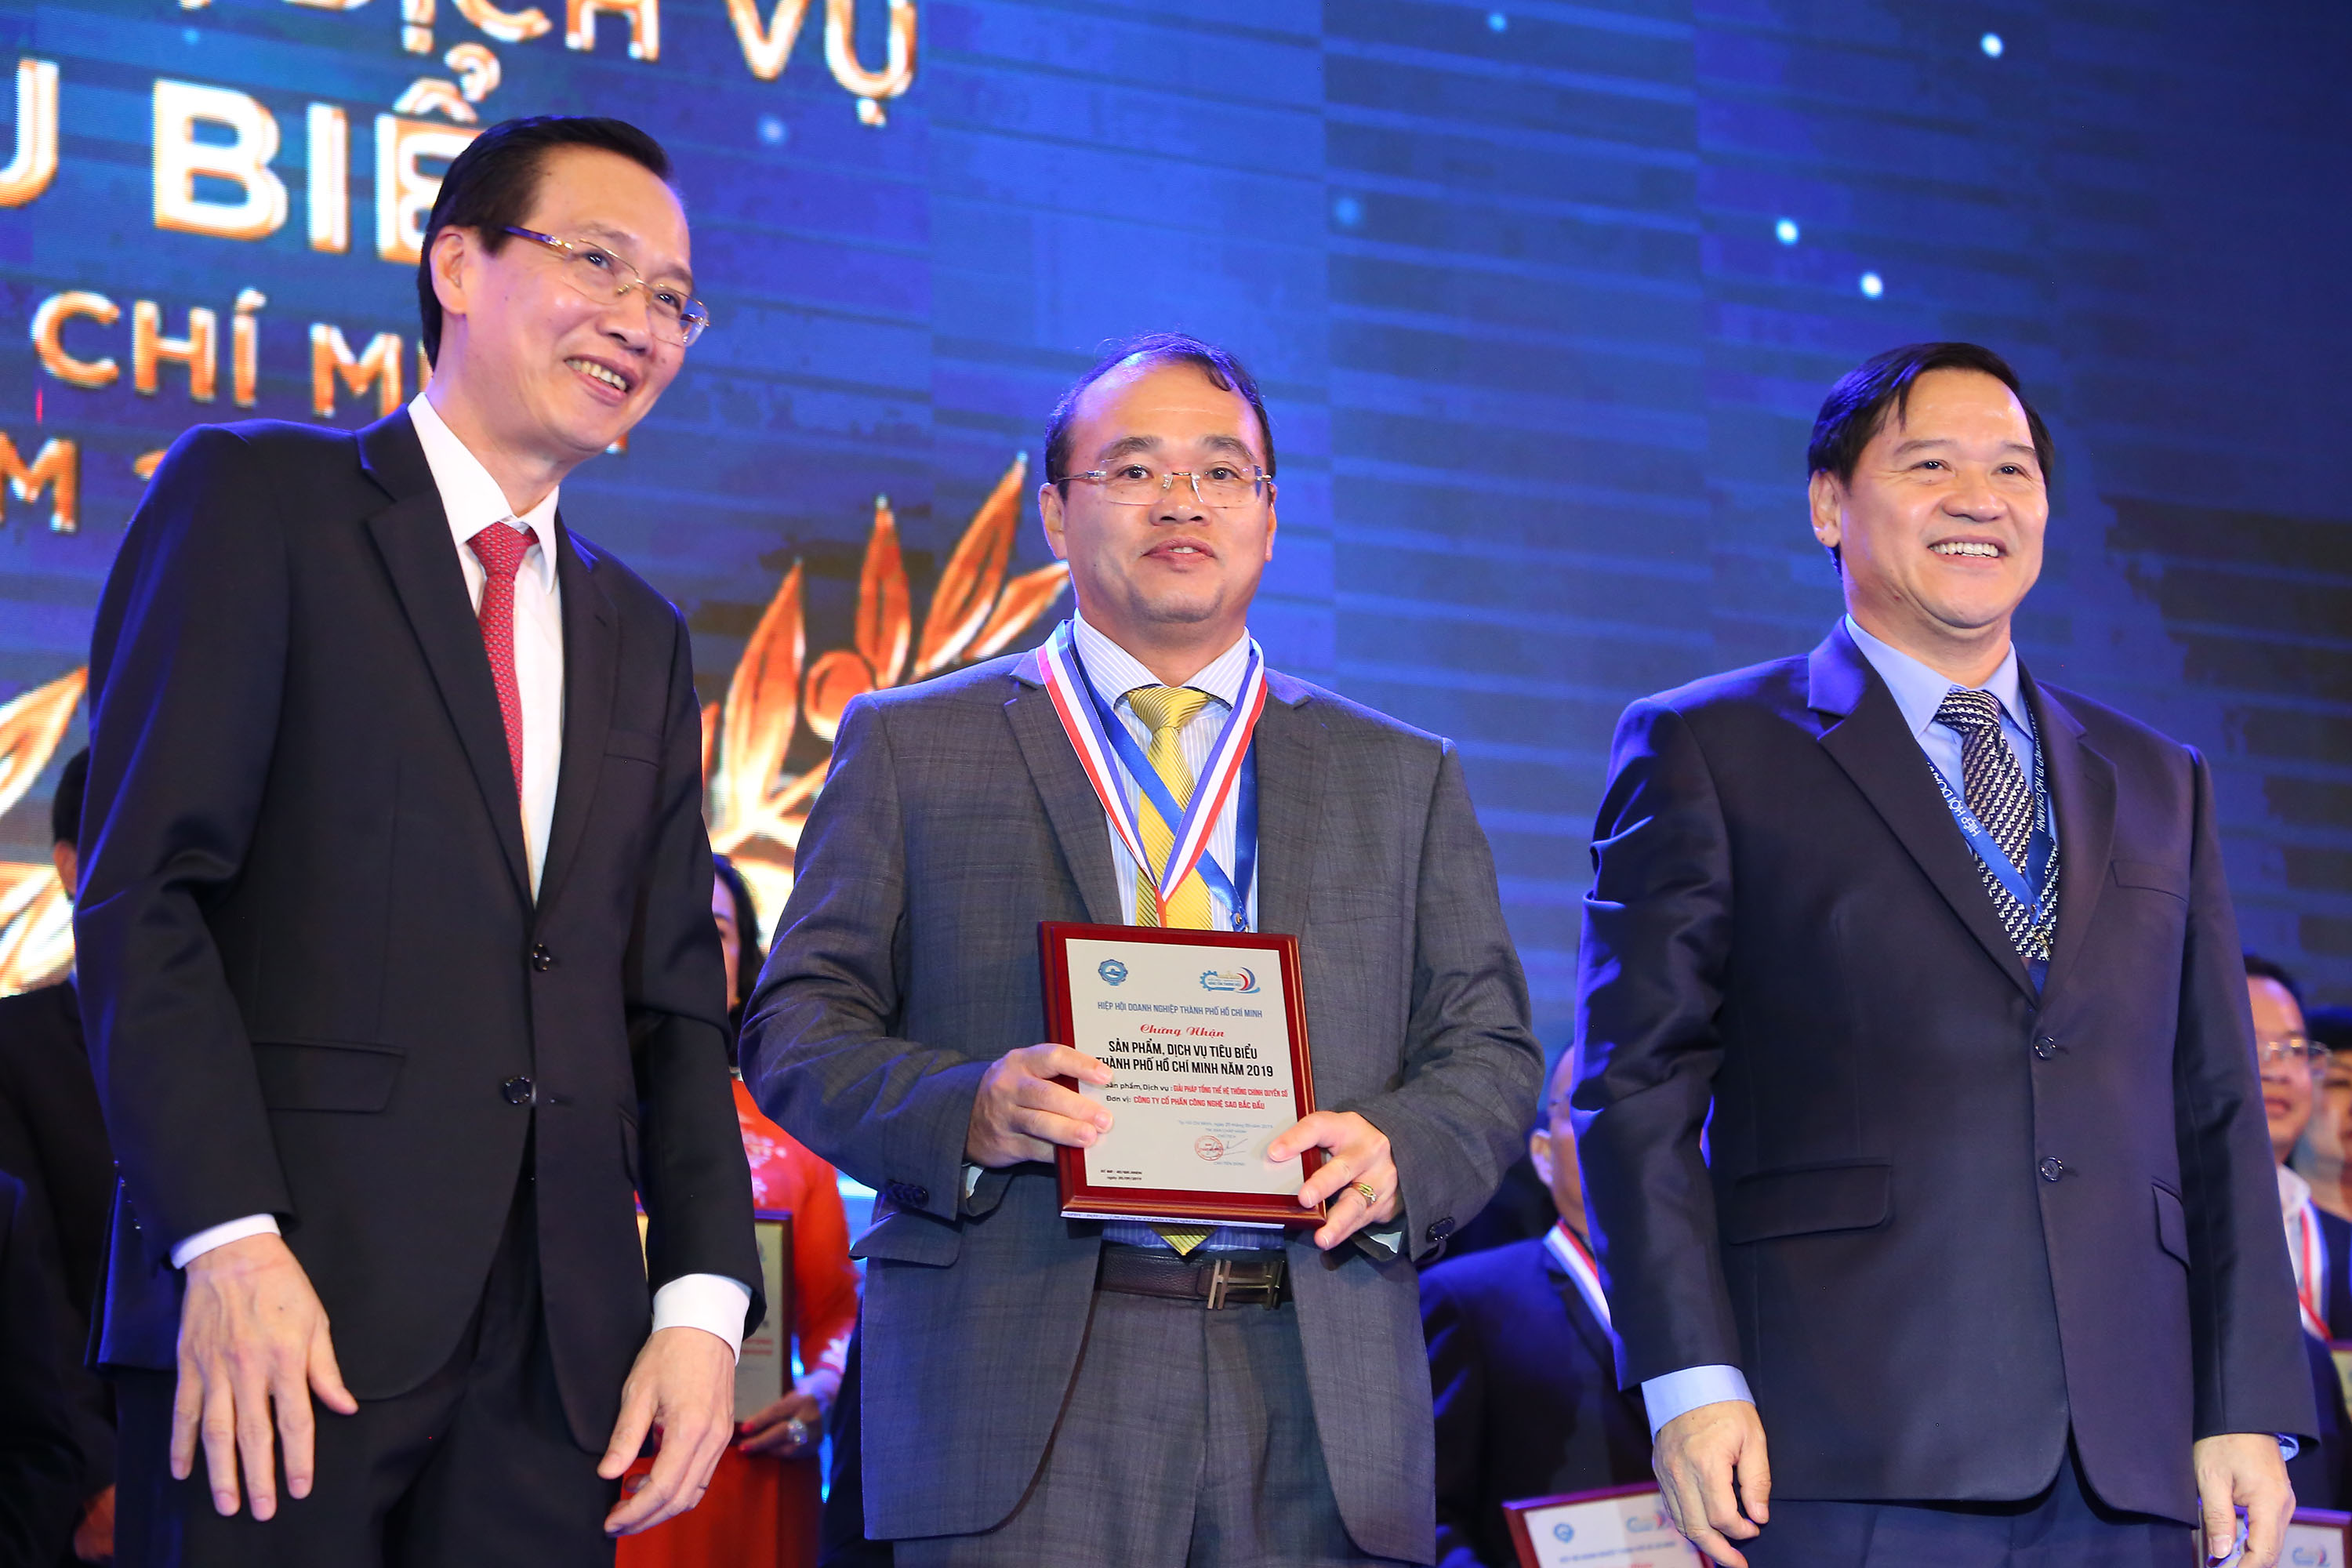 In the evening of October 22nd 2019, Vietnam Software & IT Services Association (VINASA) held a ceremony to award certificate of 50 + 10 Vietnamese Leading IT Enterprises, Sao Bac Dau continued to be one of the honored enterprises this time.   In order to